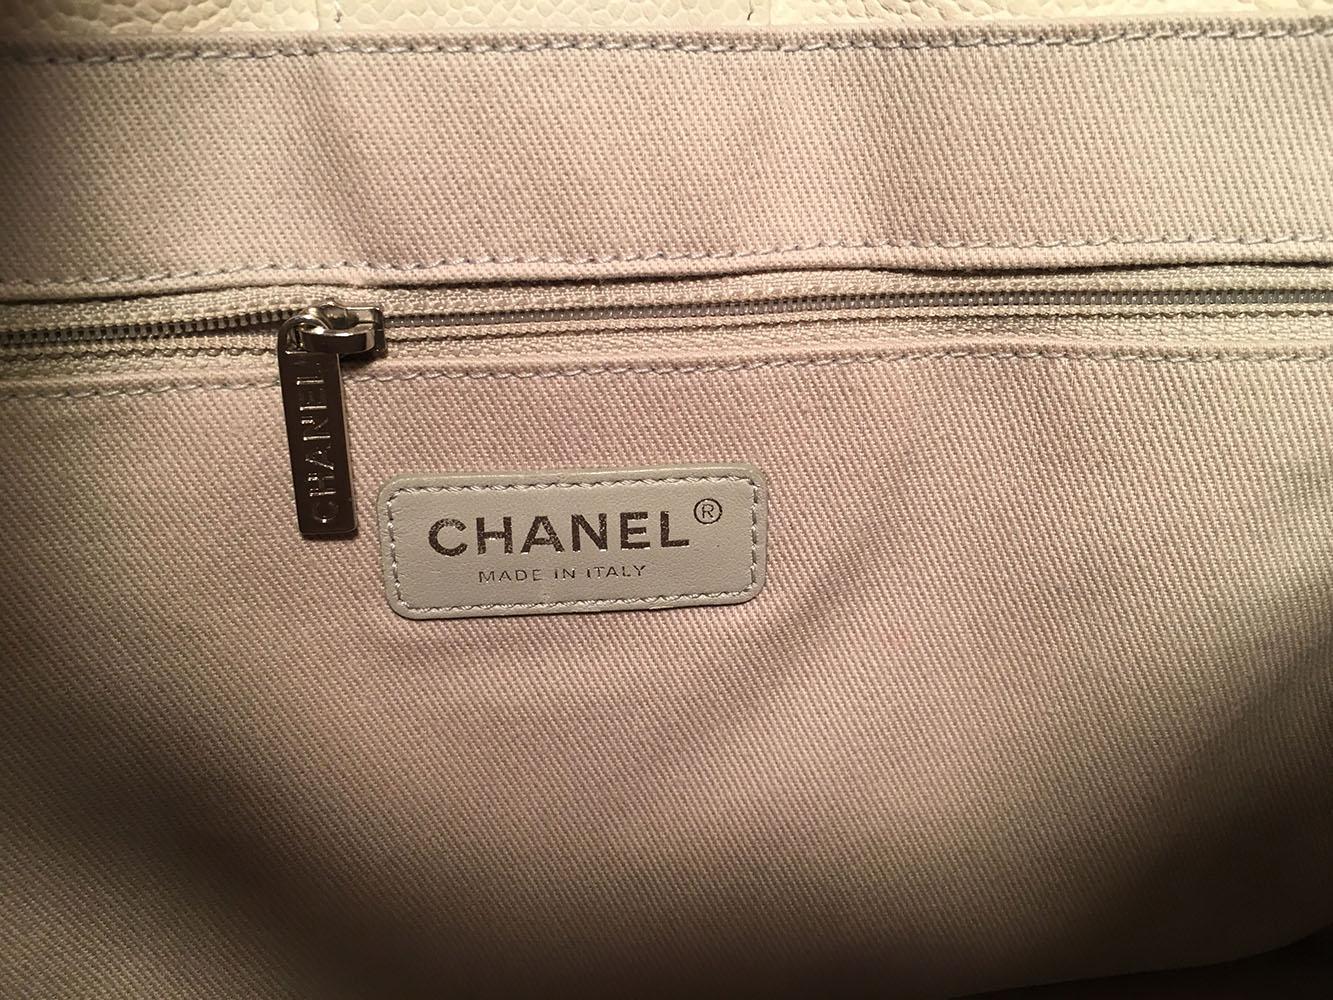 Chanel White Glazed Leather Deauville Shopping Bag Tote 5